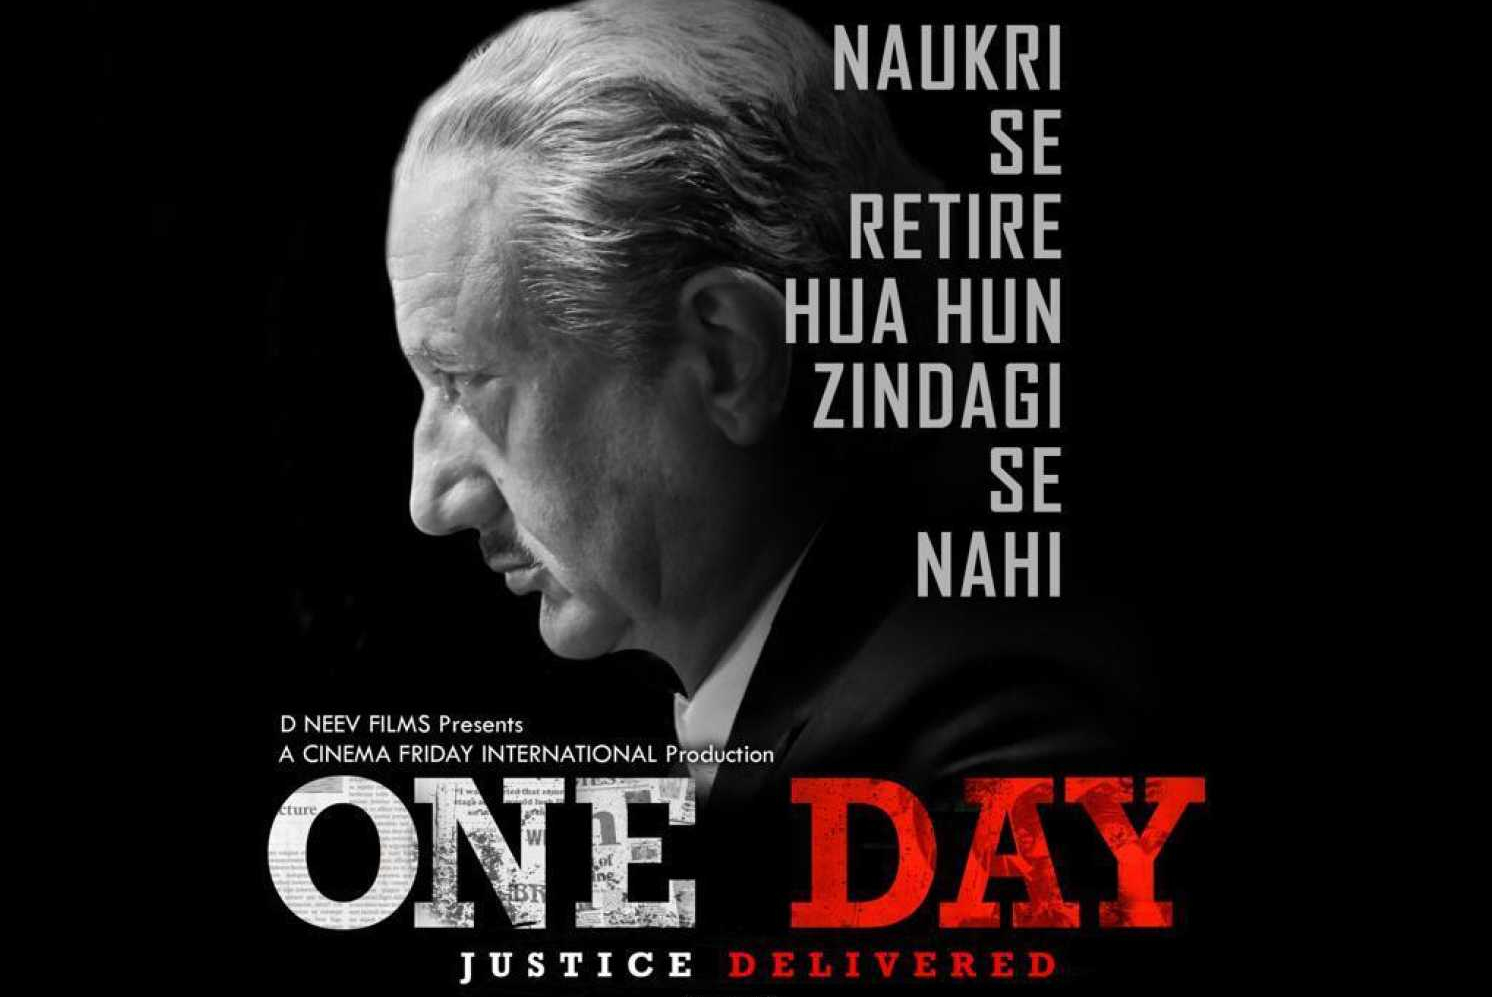 Release Of ‘One Day: Justice Delivered’ Postponed